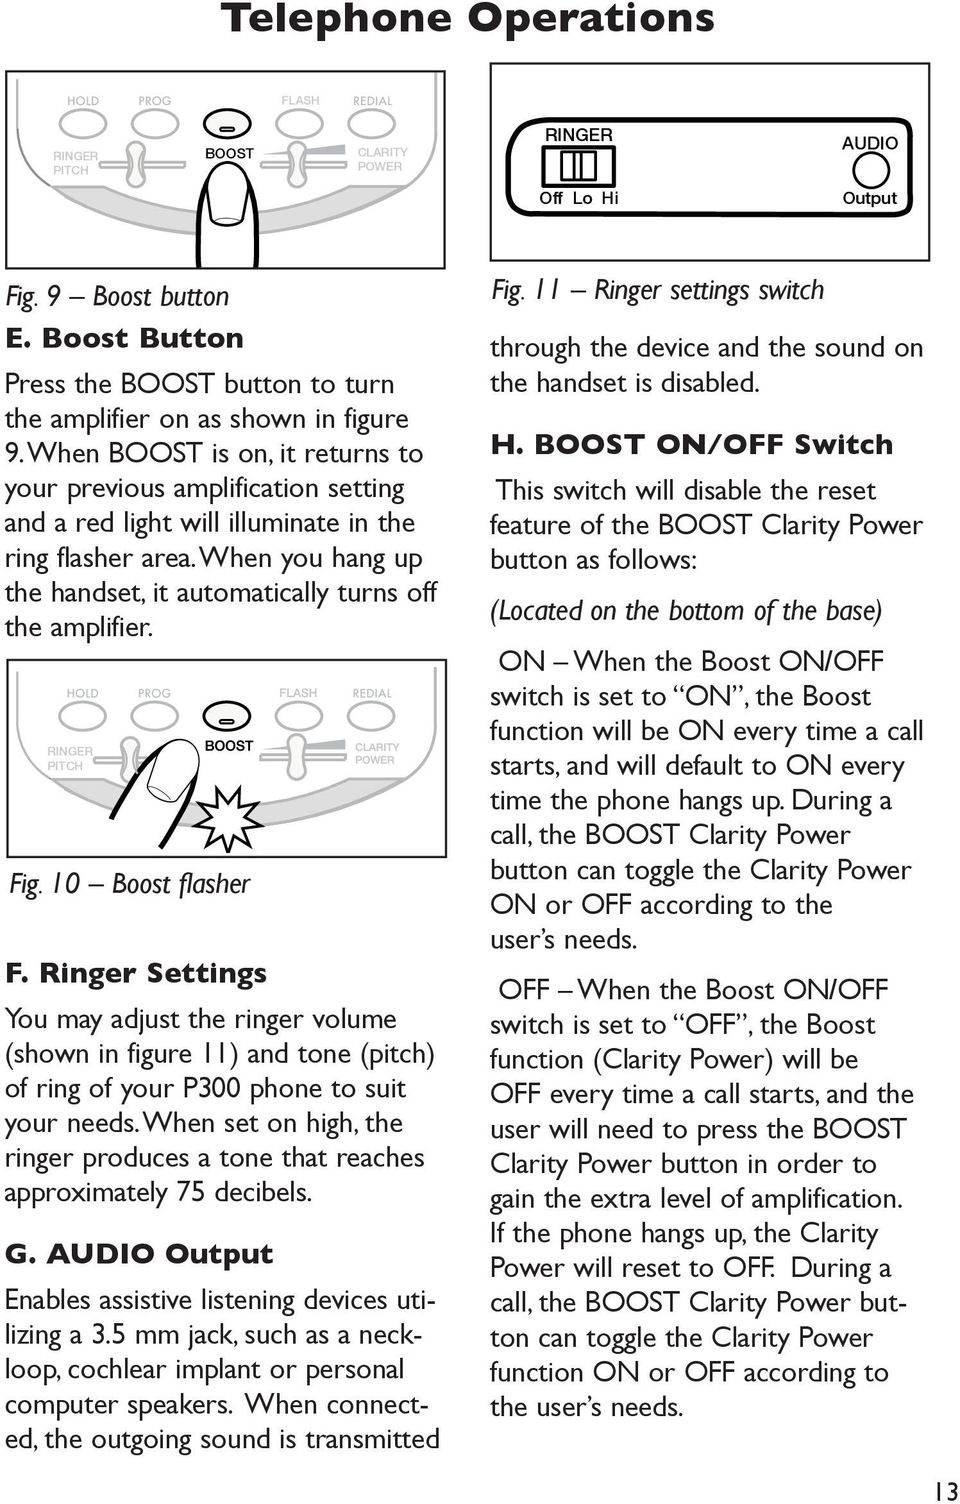 RINGER PITCH Fig. 10 Boost flasher F. Ringer Settings You may adjust the ringer volume (shown in figure 11) and tone (pitch) of ring of your P300 phone to suit your needs.